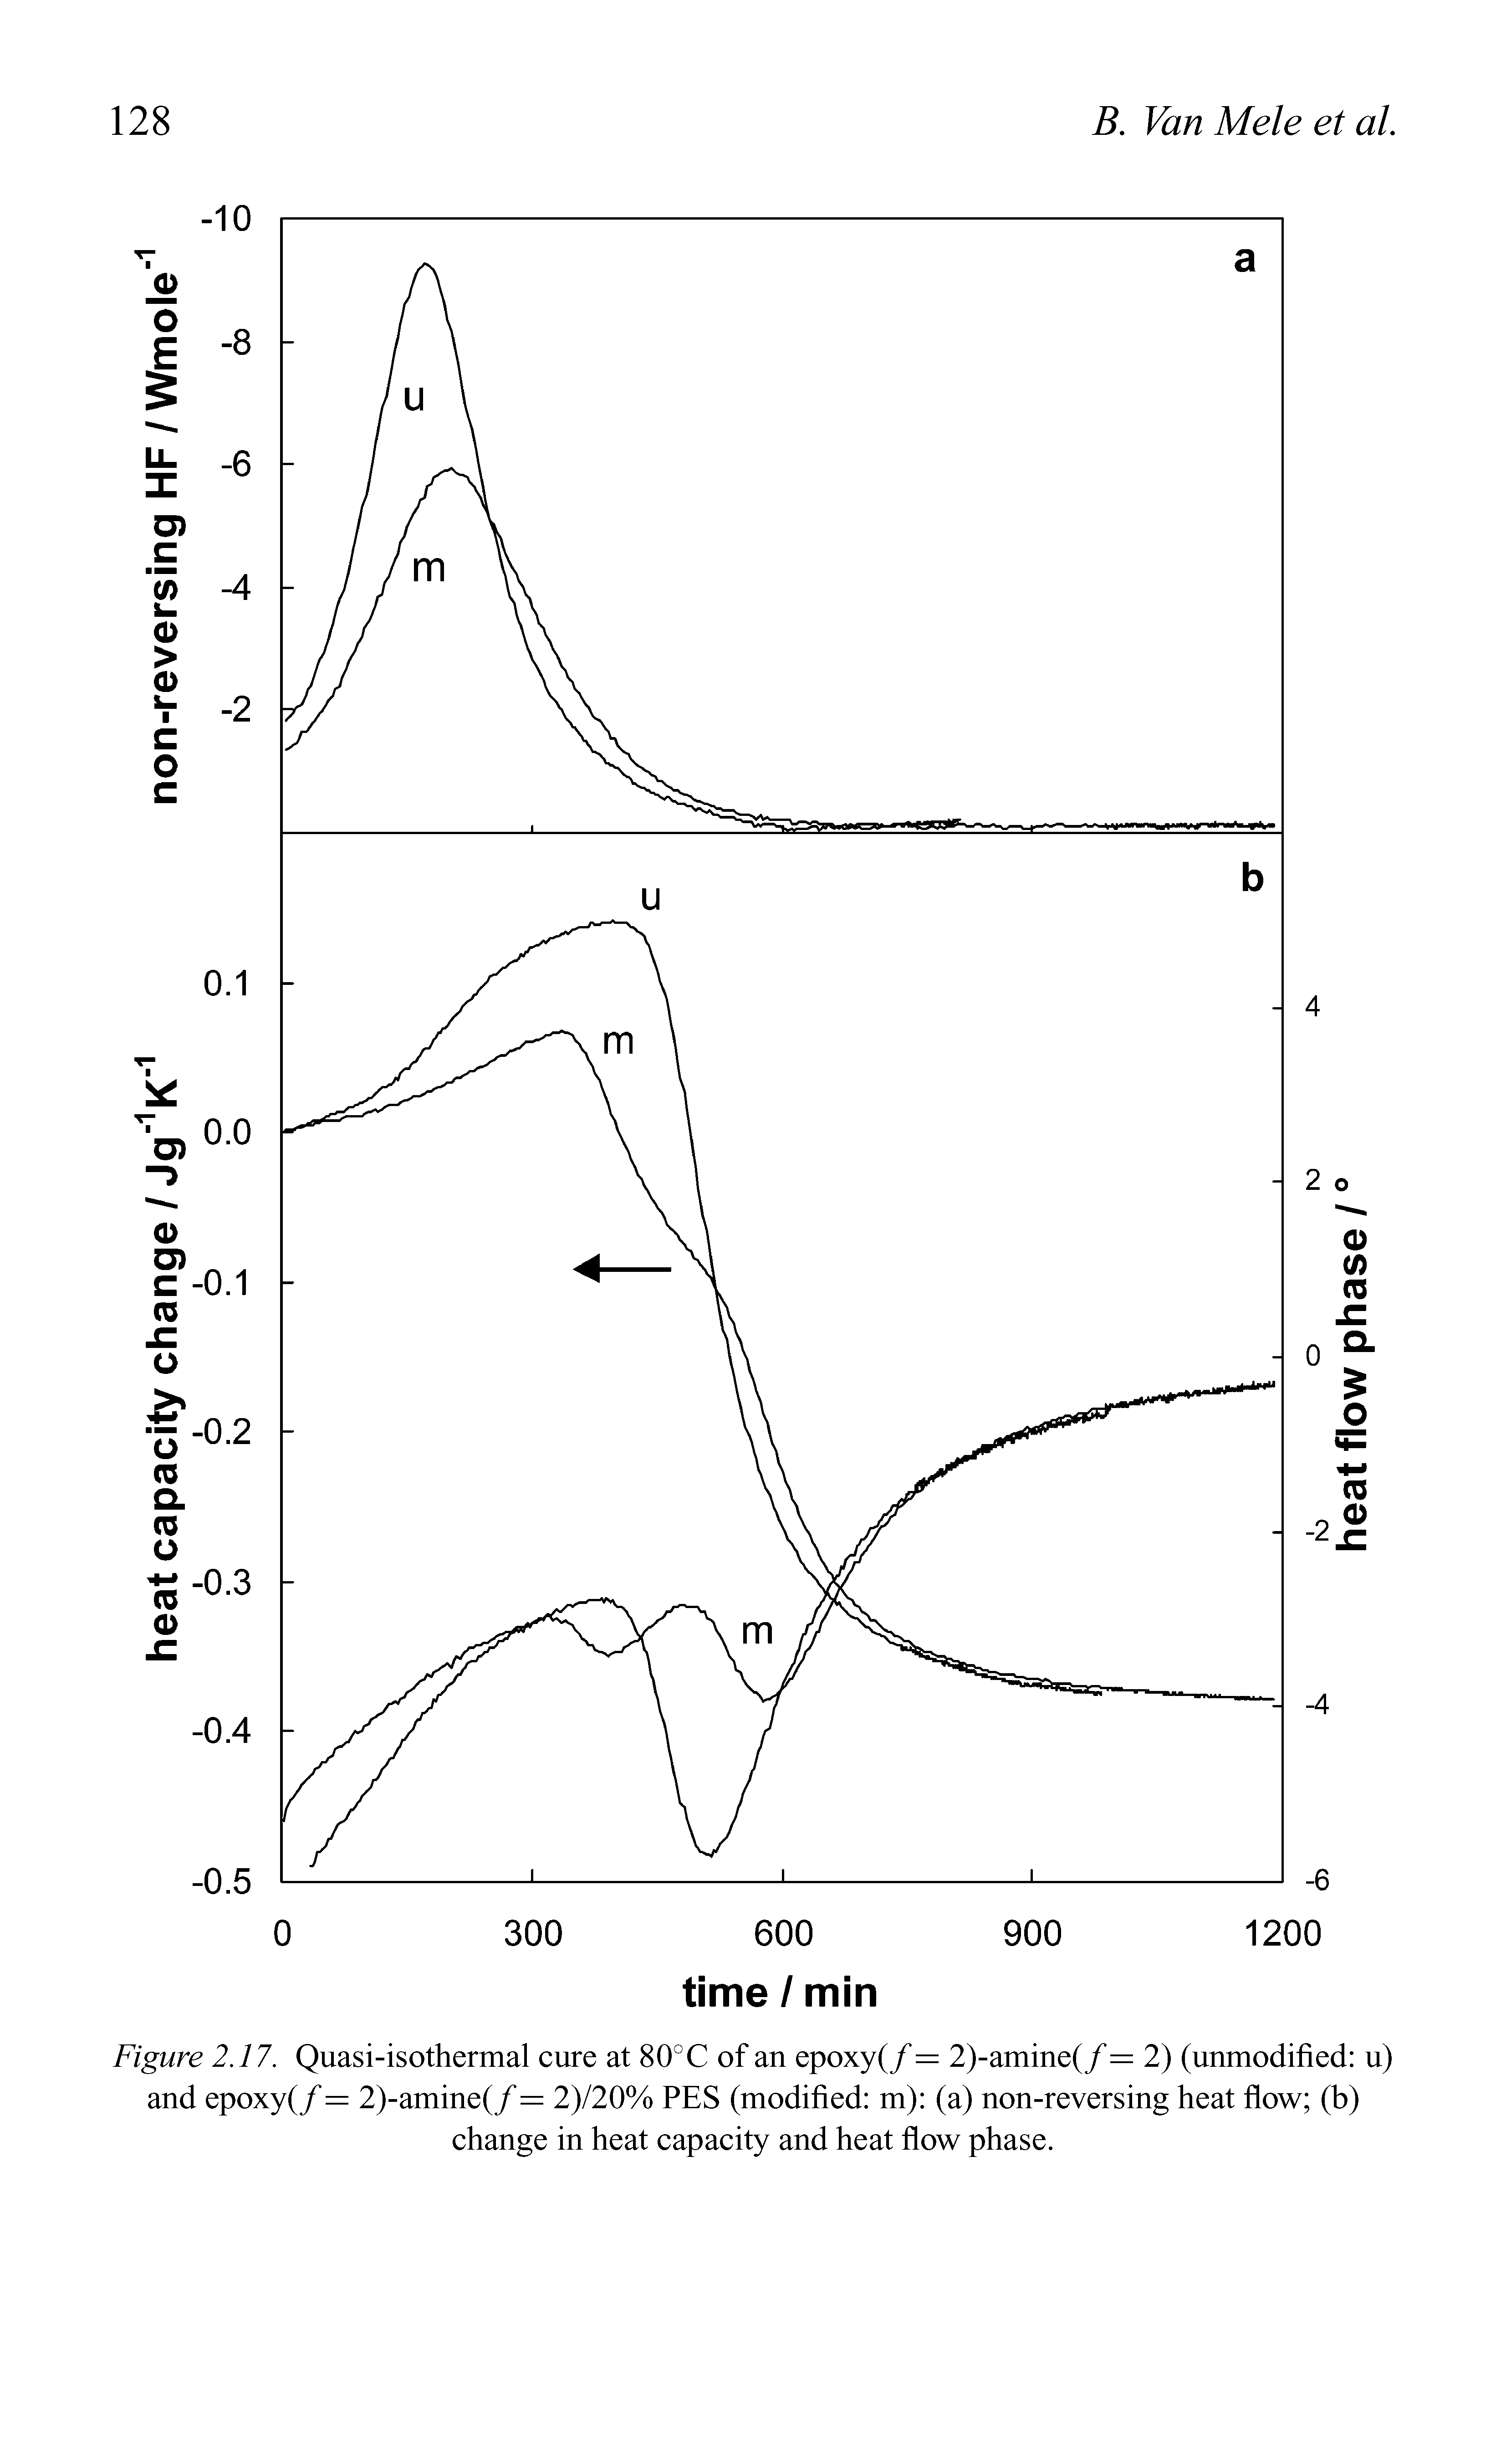 Figure 2.17. Quasi-isothermal cure at 80°C of an epoxy(/ = 2)-amine(/ = 2) (unmodified u) and epoxy(/ = 2)-amine(/ = 2)/20% PES (modified m) (a) non-reversing heat flow (b) change in heat capacity and heat flow phase.